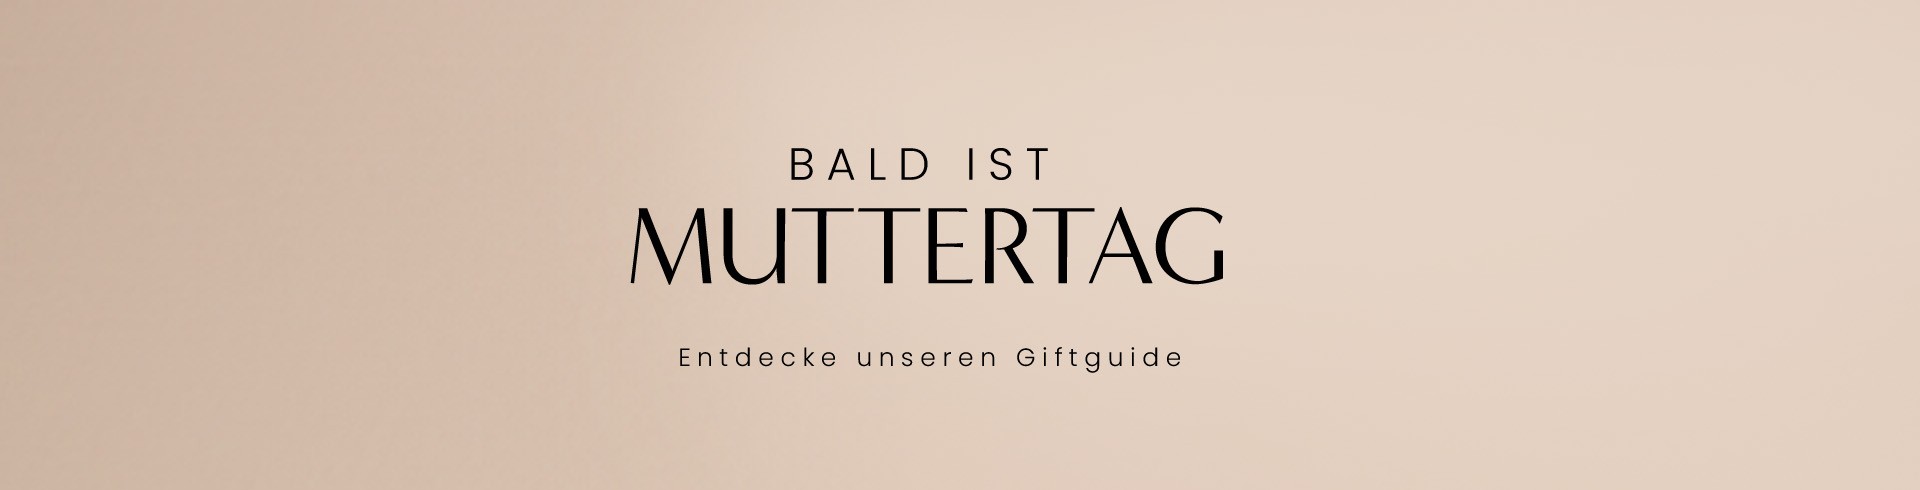 Muttertag: Giftguide